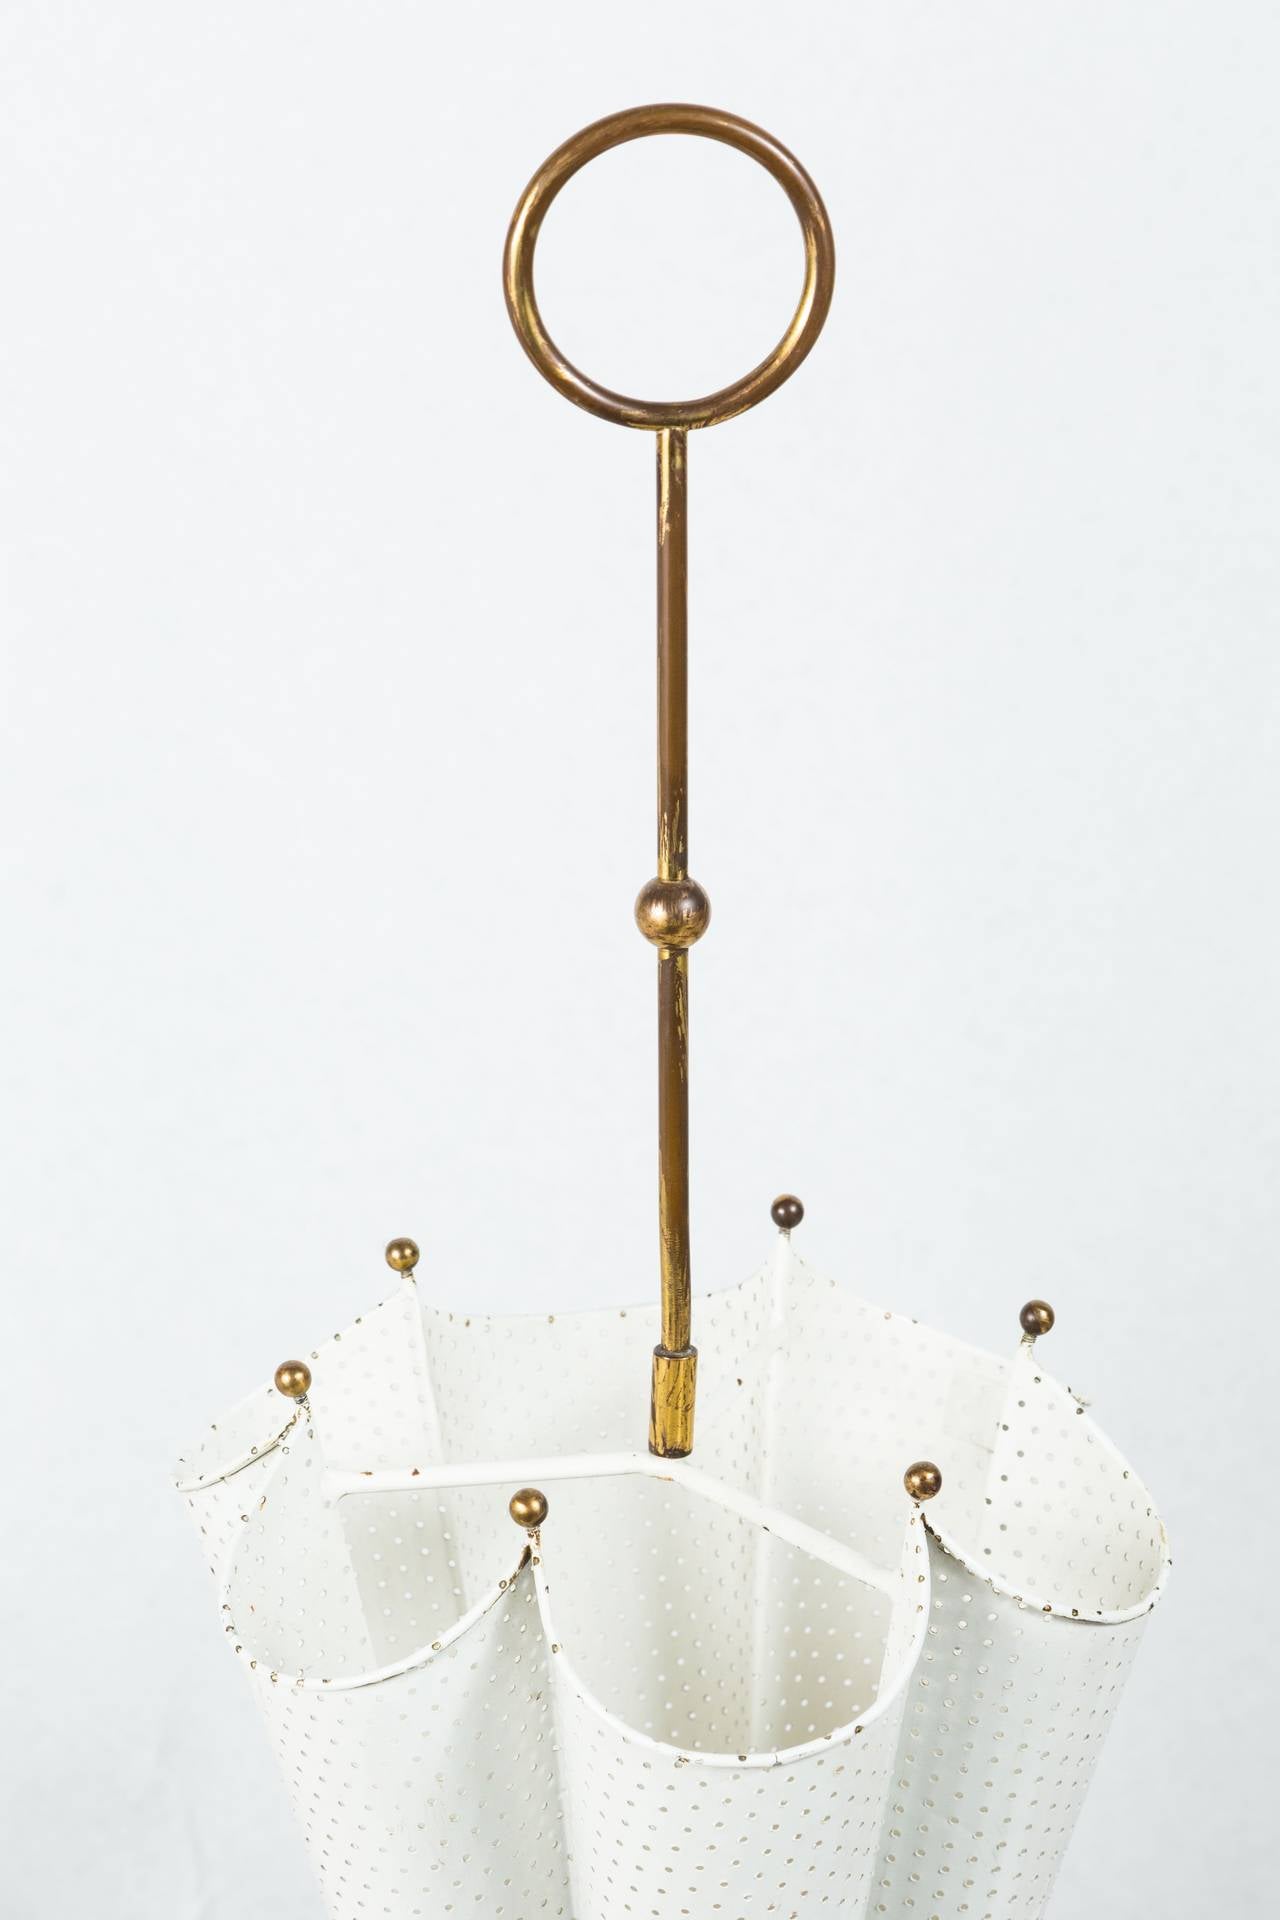 Wonderful painted metal umbrella stand with brass details. Design is of an upside down umbrella and features white painted perforated metal with brass details. A brass acanthus leaf gracefully covers the base and the 